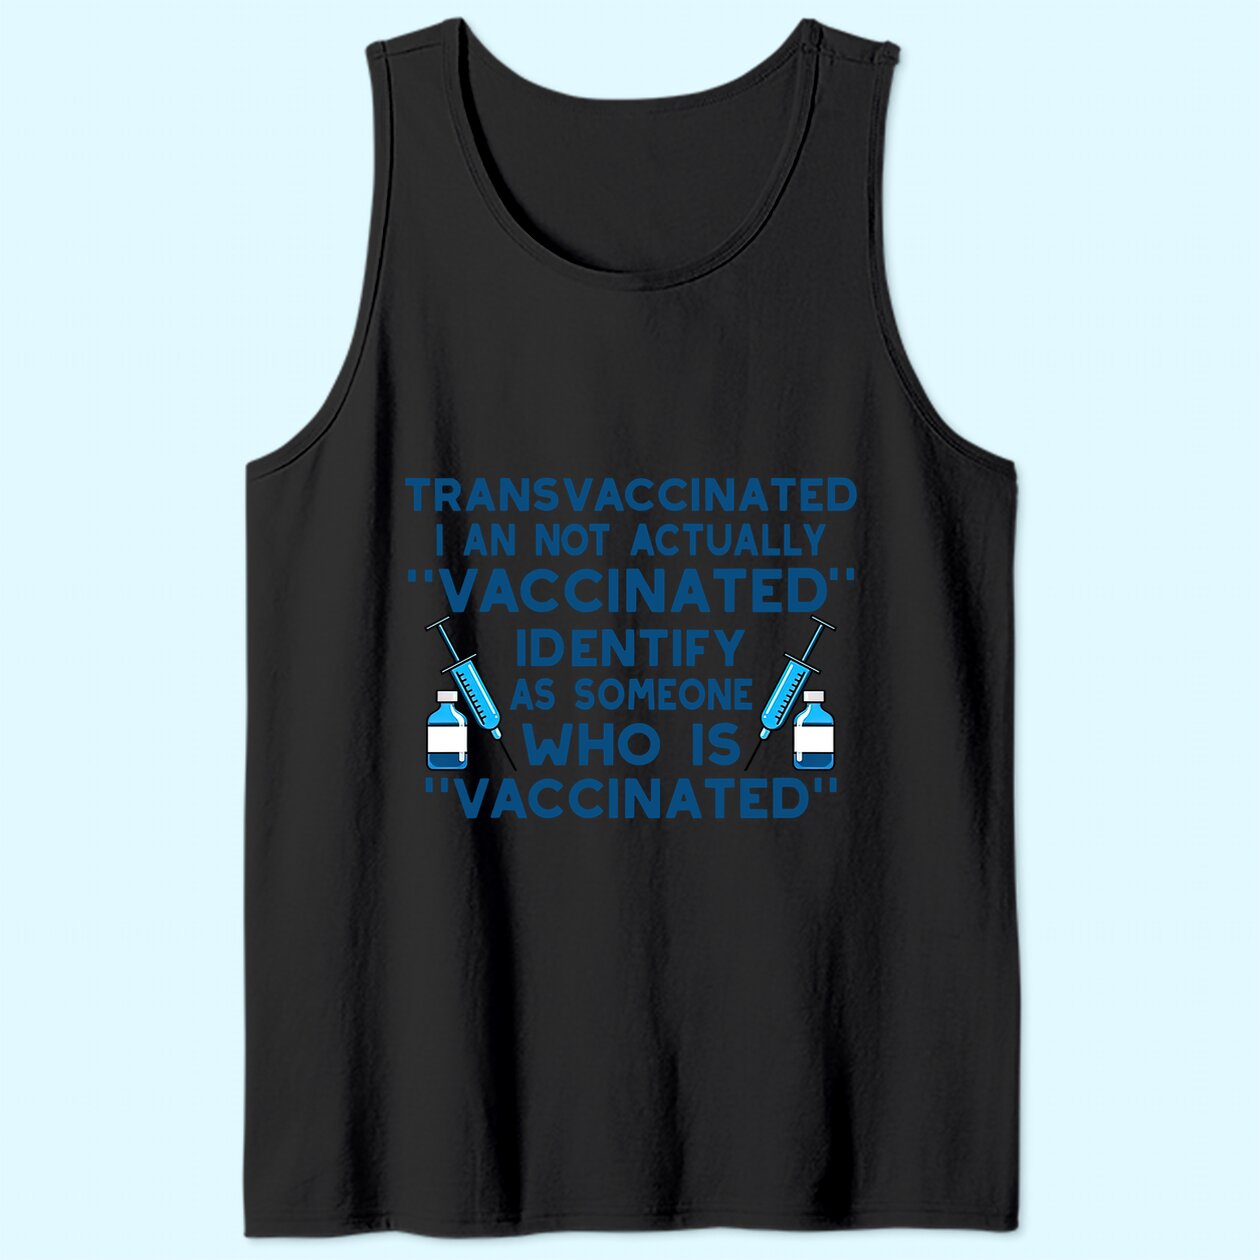 Funny Trans Vaccinated Funny Tank Top